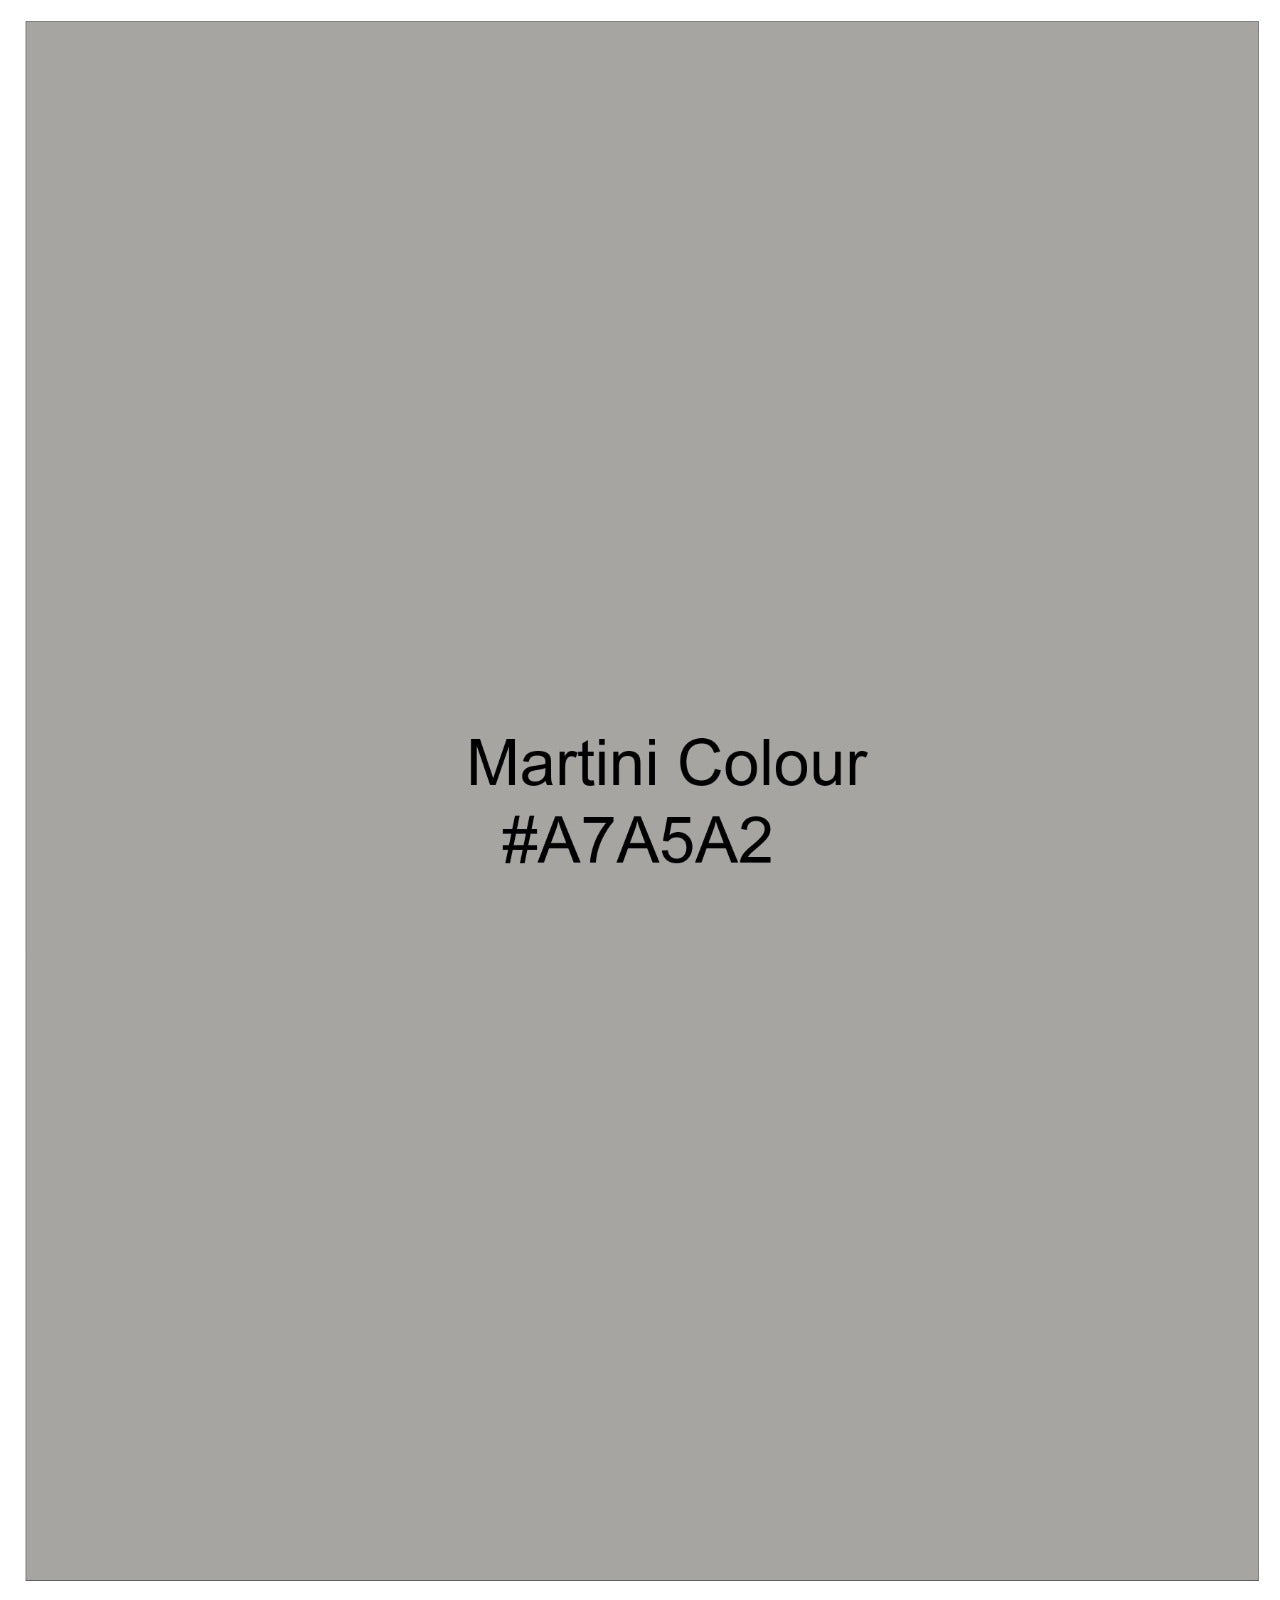 Martini Gray Stretchable Double Breasted Premium Cotton traveler Suit ST2668-DB-36,ST2668-DB-38,ST2668-DB-40,ST2668-DB-42,ST2668-DB-44,ST2668-DB-46,ST2668-DB-48,ST2668-DB-50,ST2668-DB-52,ST2668-DB-54,ST2668-DB-56,ST2668-DB-58,ST2668-DB-60